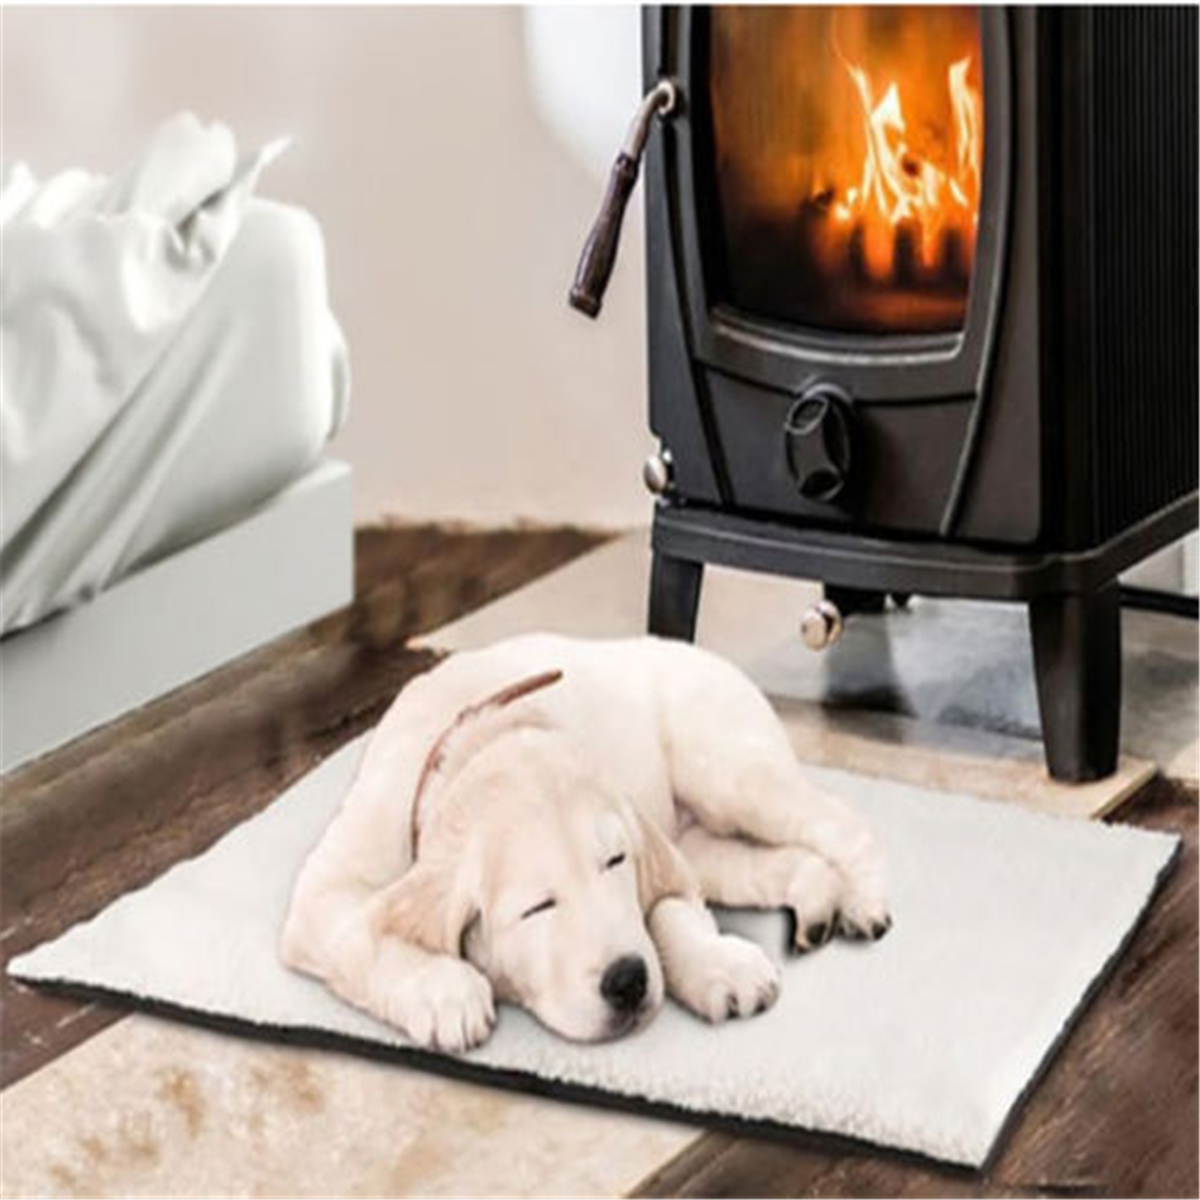 Pet-Self-Heating-Thermal-Dog-Cat-Bed-Kitty-Cushion-Heated-Mat-Warm-Washable-1396893-1